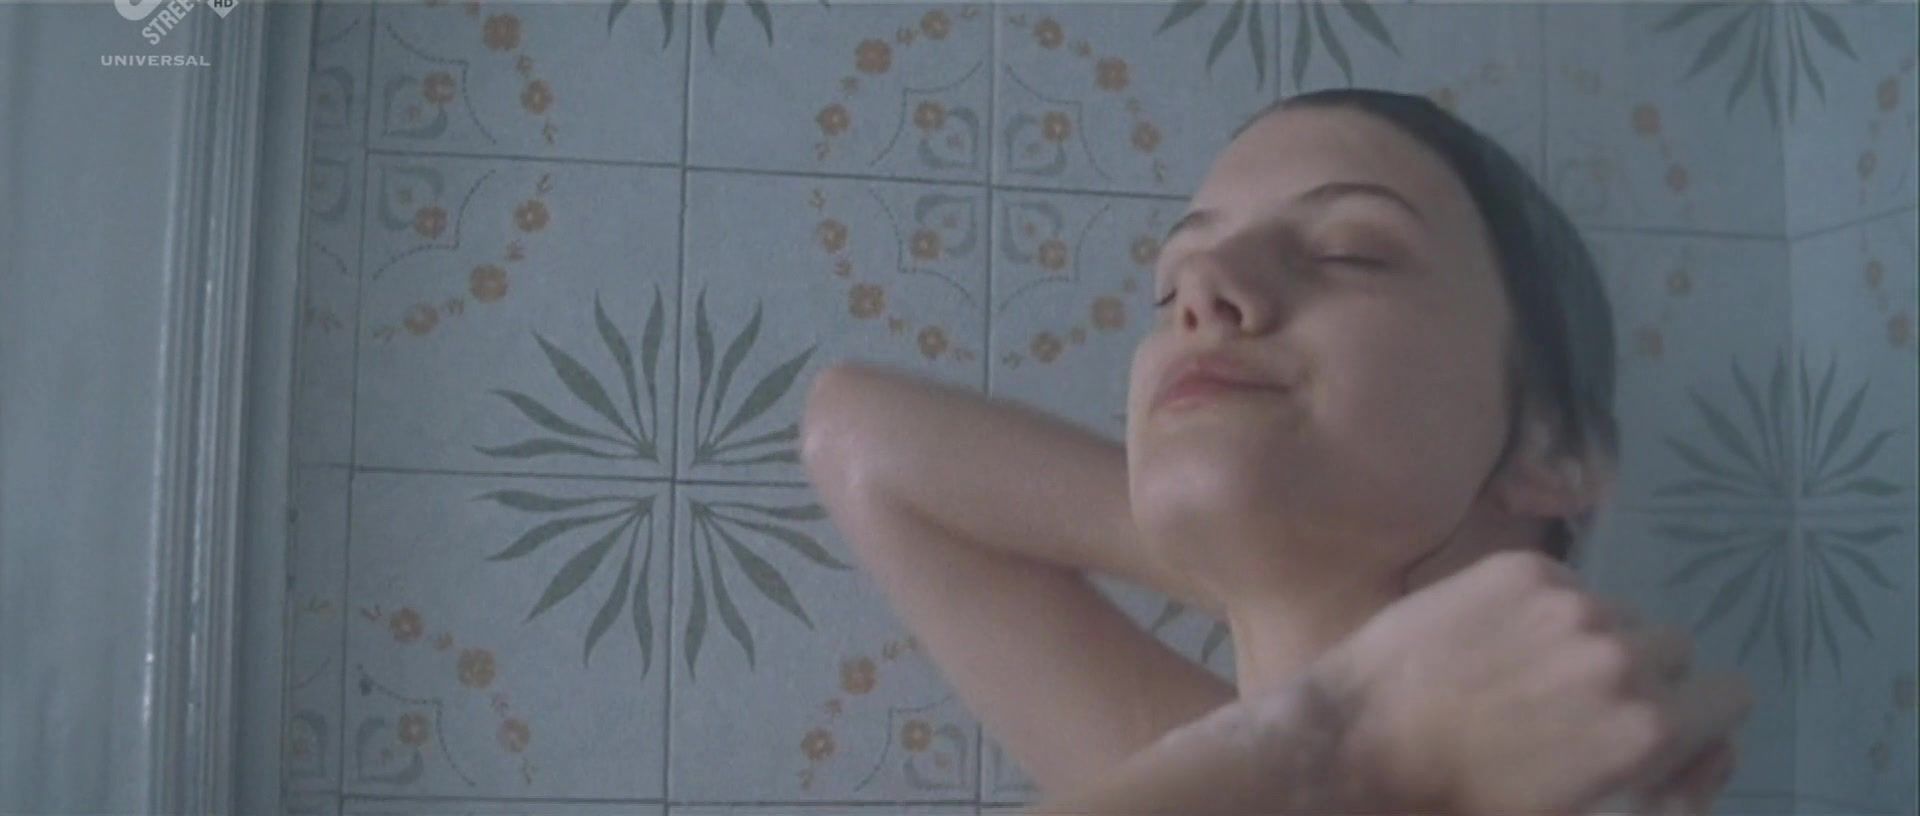 Gay Boy Porn Topless Melanie Laurent from Shower Video of the French movie "La chambre des morts" Point Of View - 1